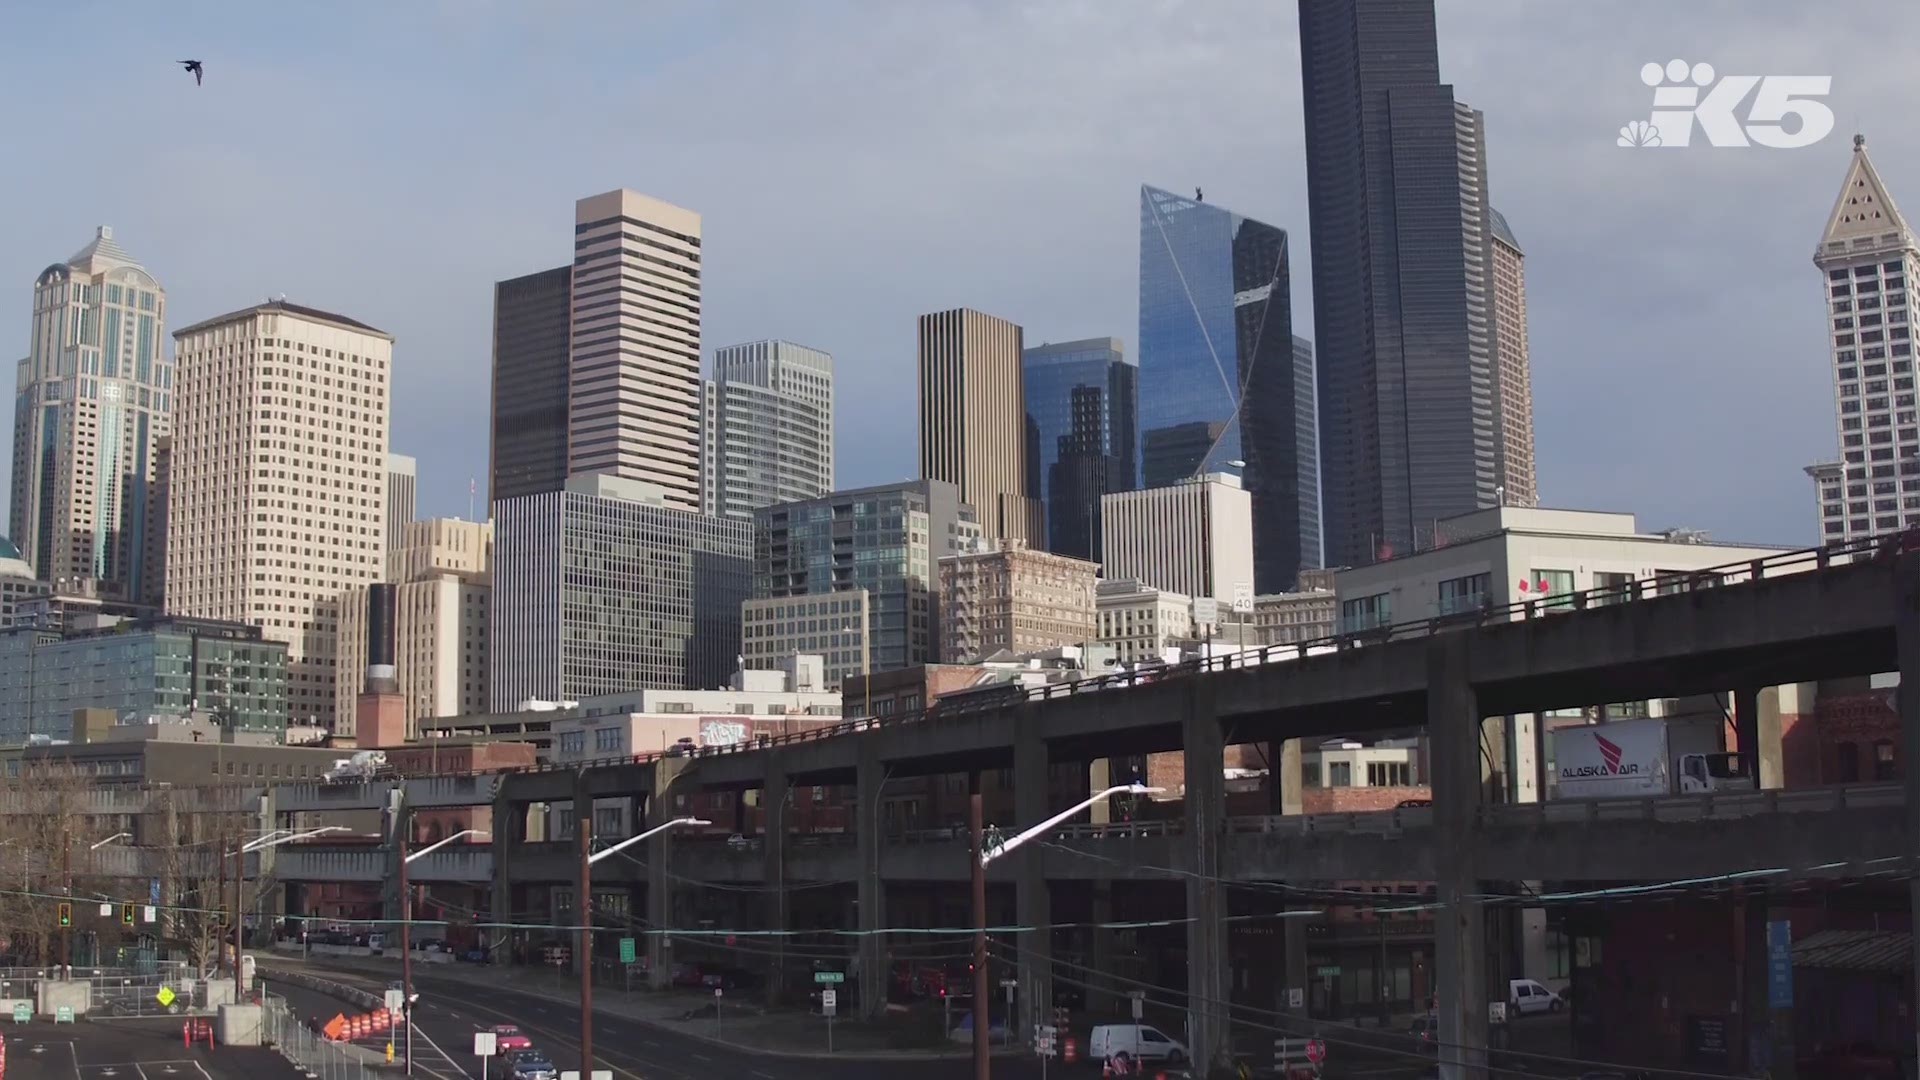 Take in an aerial view of the Alaskan Way Viaduct in Seattle.